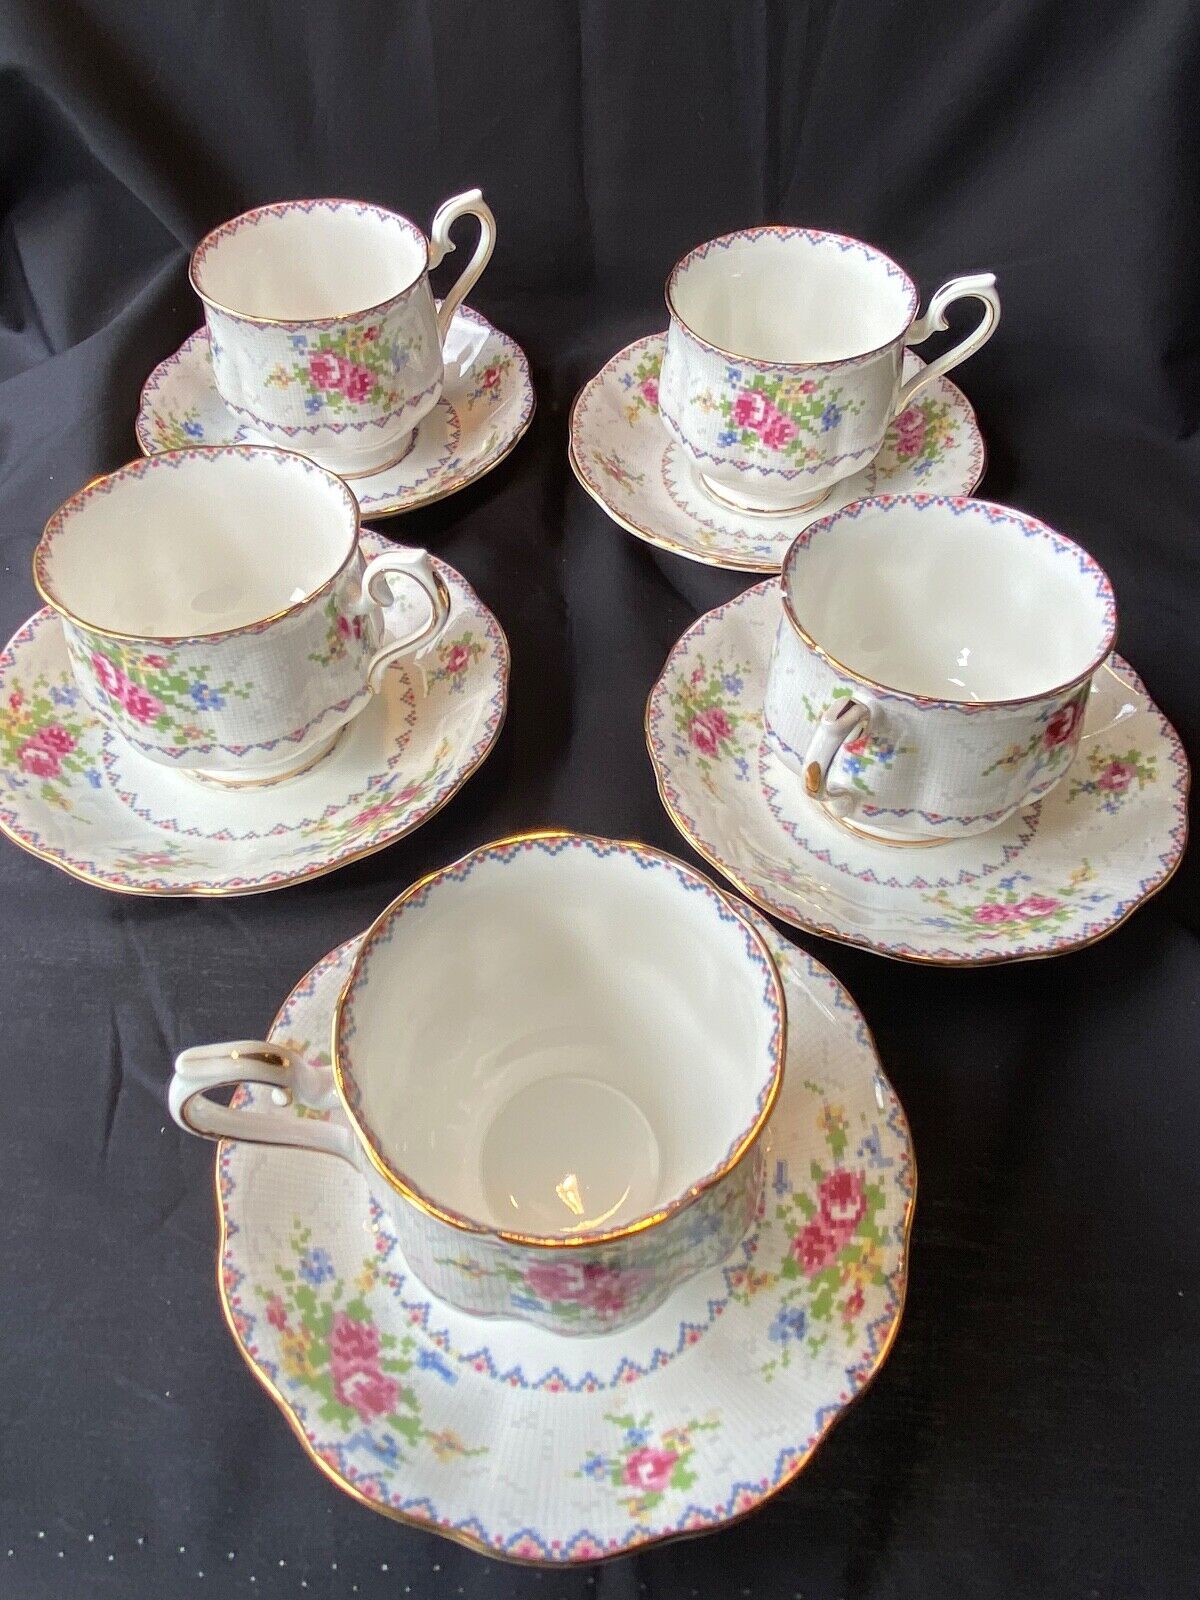 FIVE ROYAL ALBERT CUPS AND SAUCERS - PETIT POINT